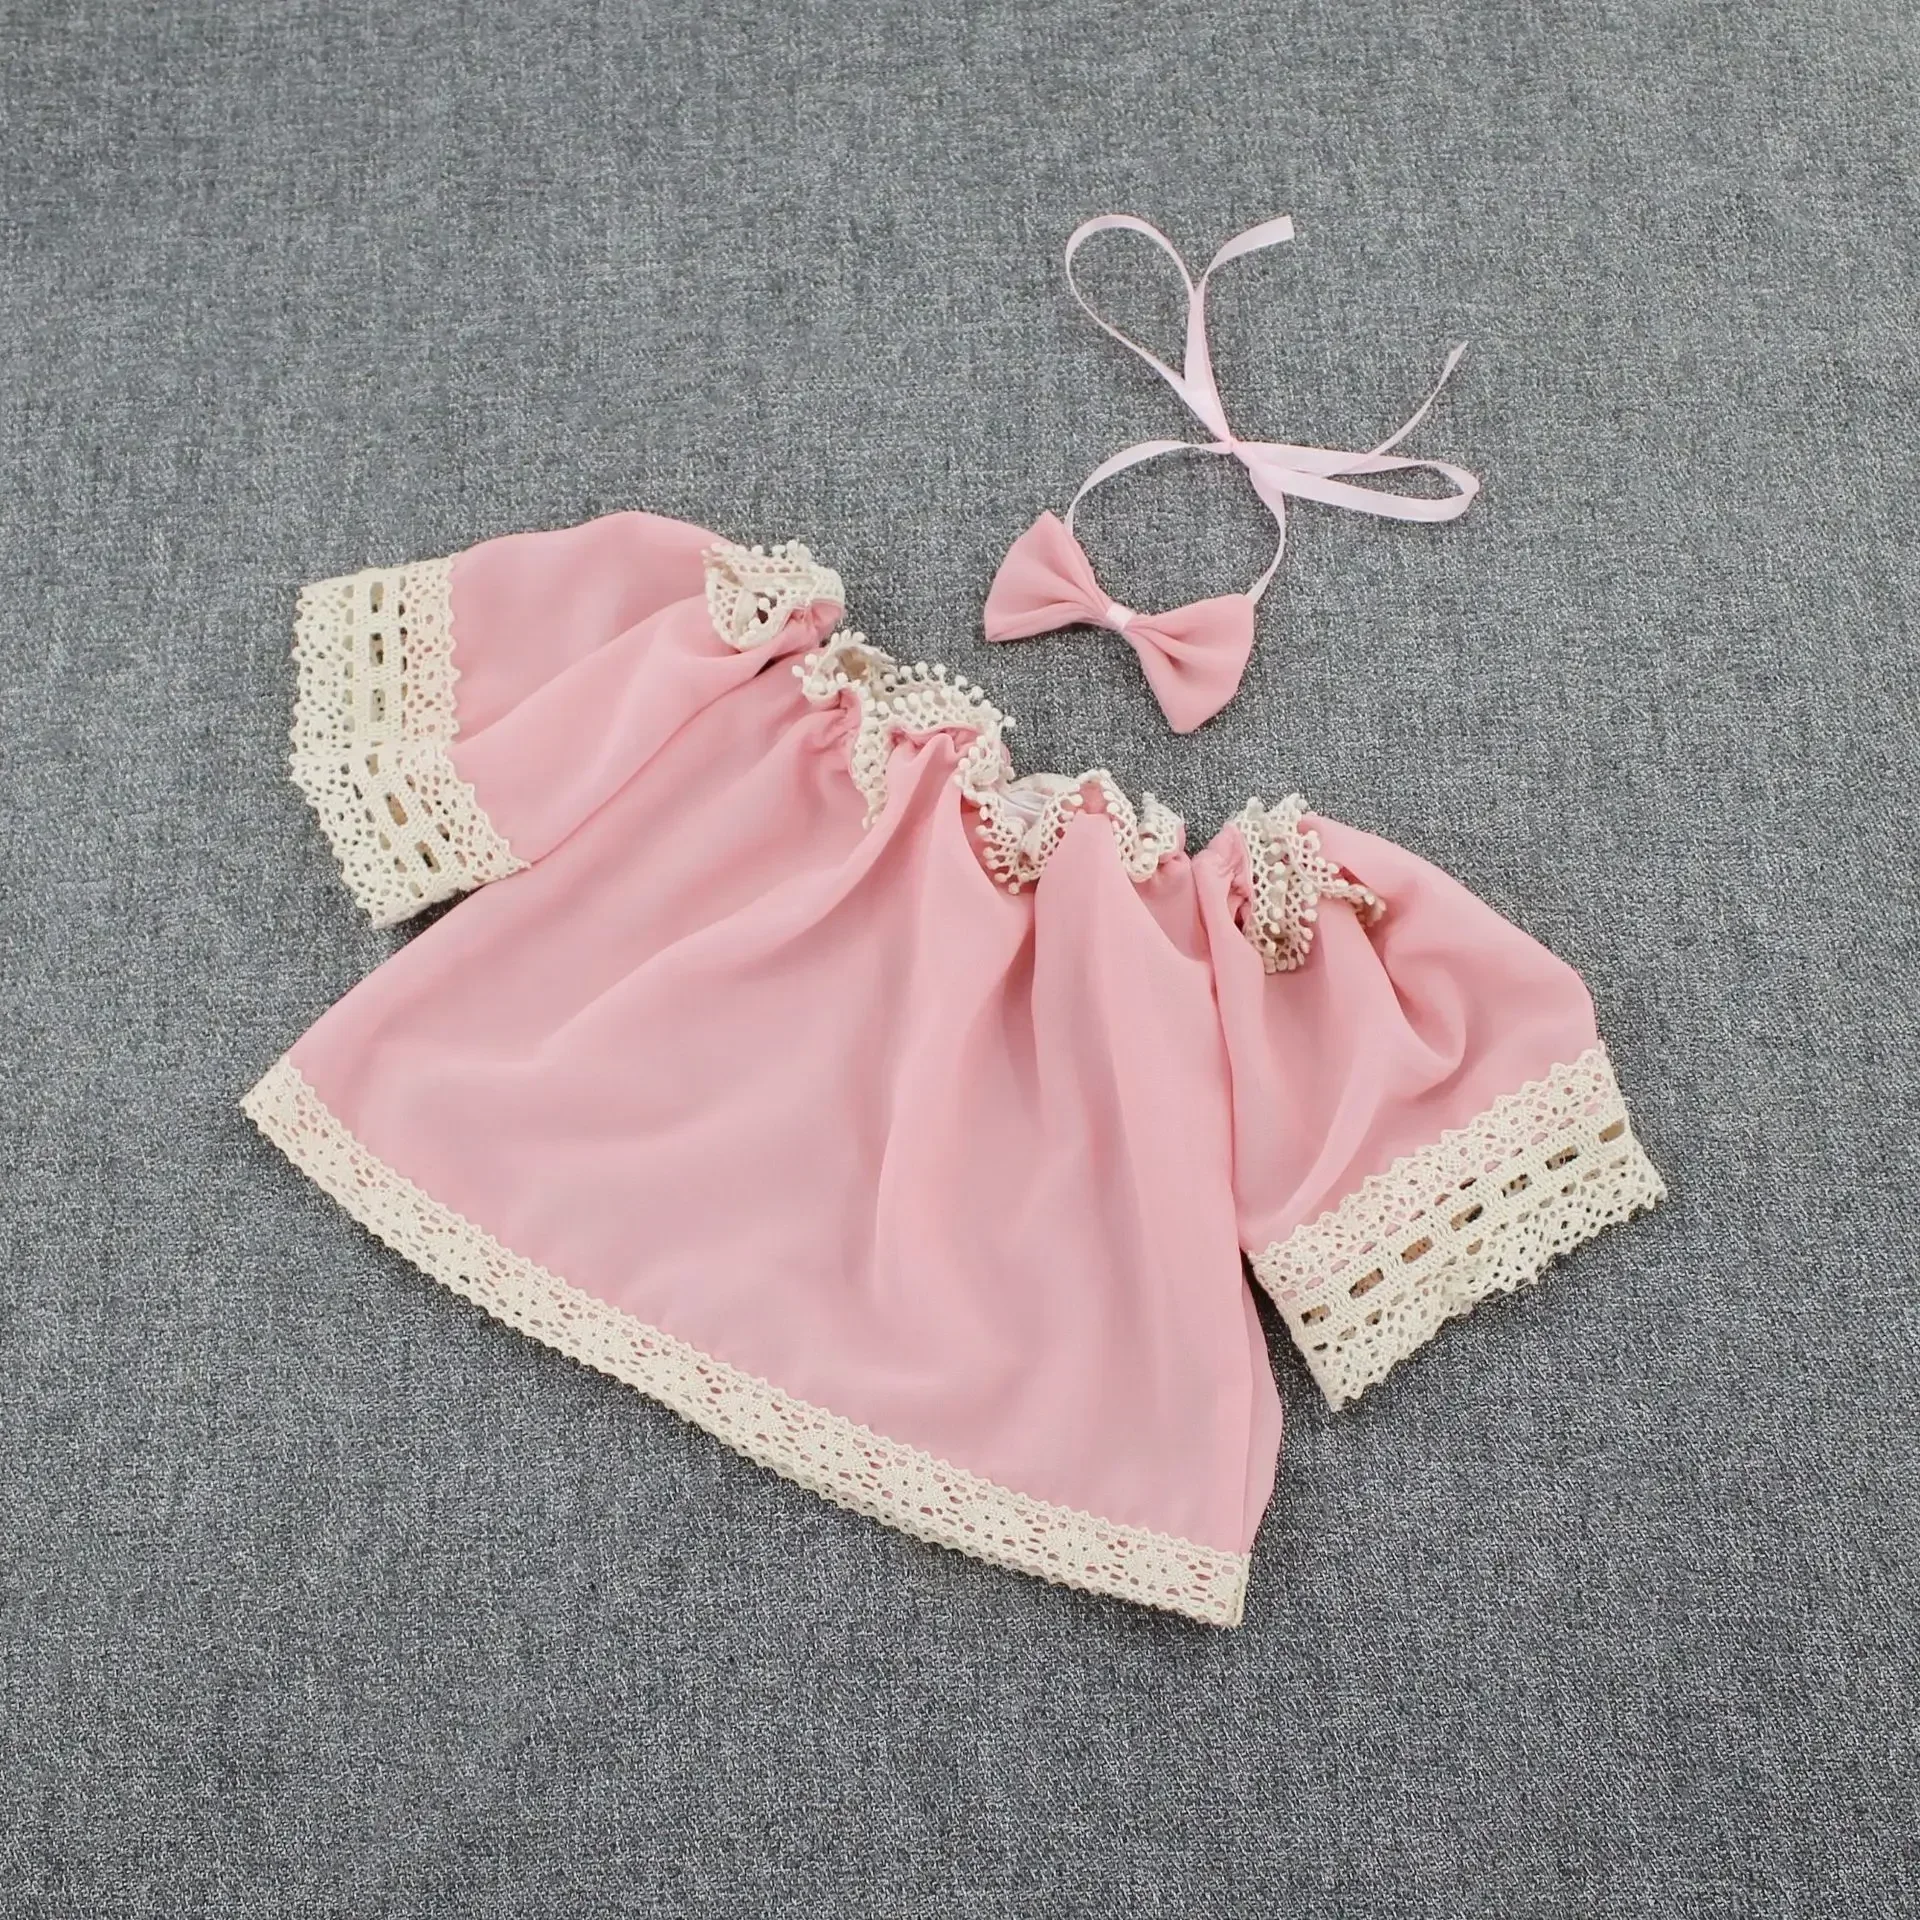 

Baby Girl Clothes Newborn Photography Prop Dress Strapless Shoulder Flower Lace Skirt Outfit Infant Photo Shoot Suit Accessories